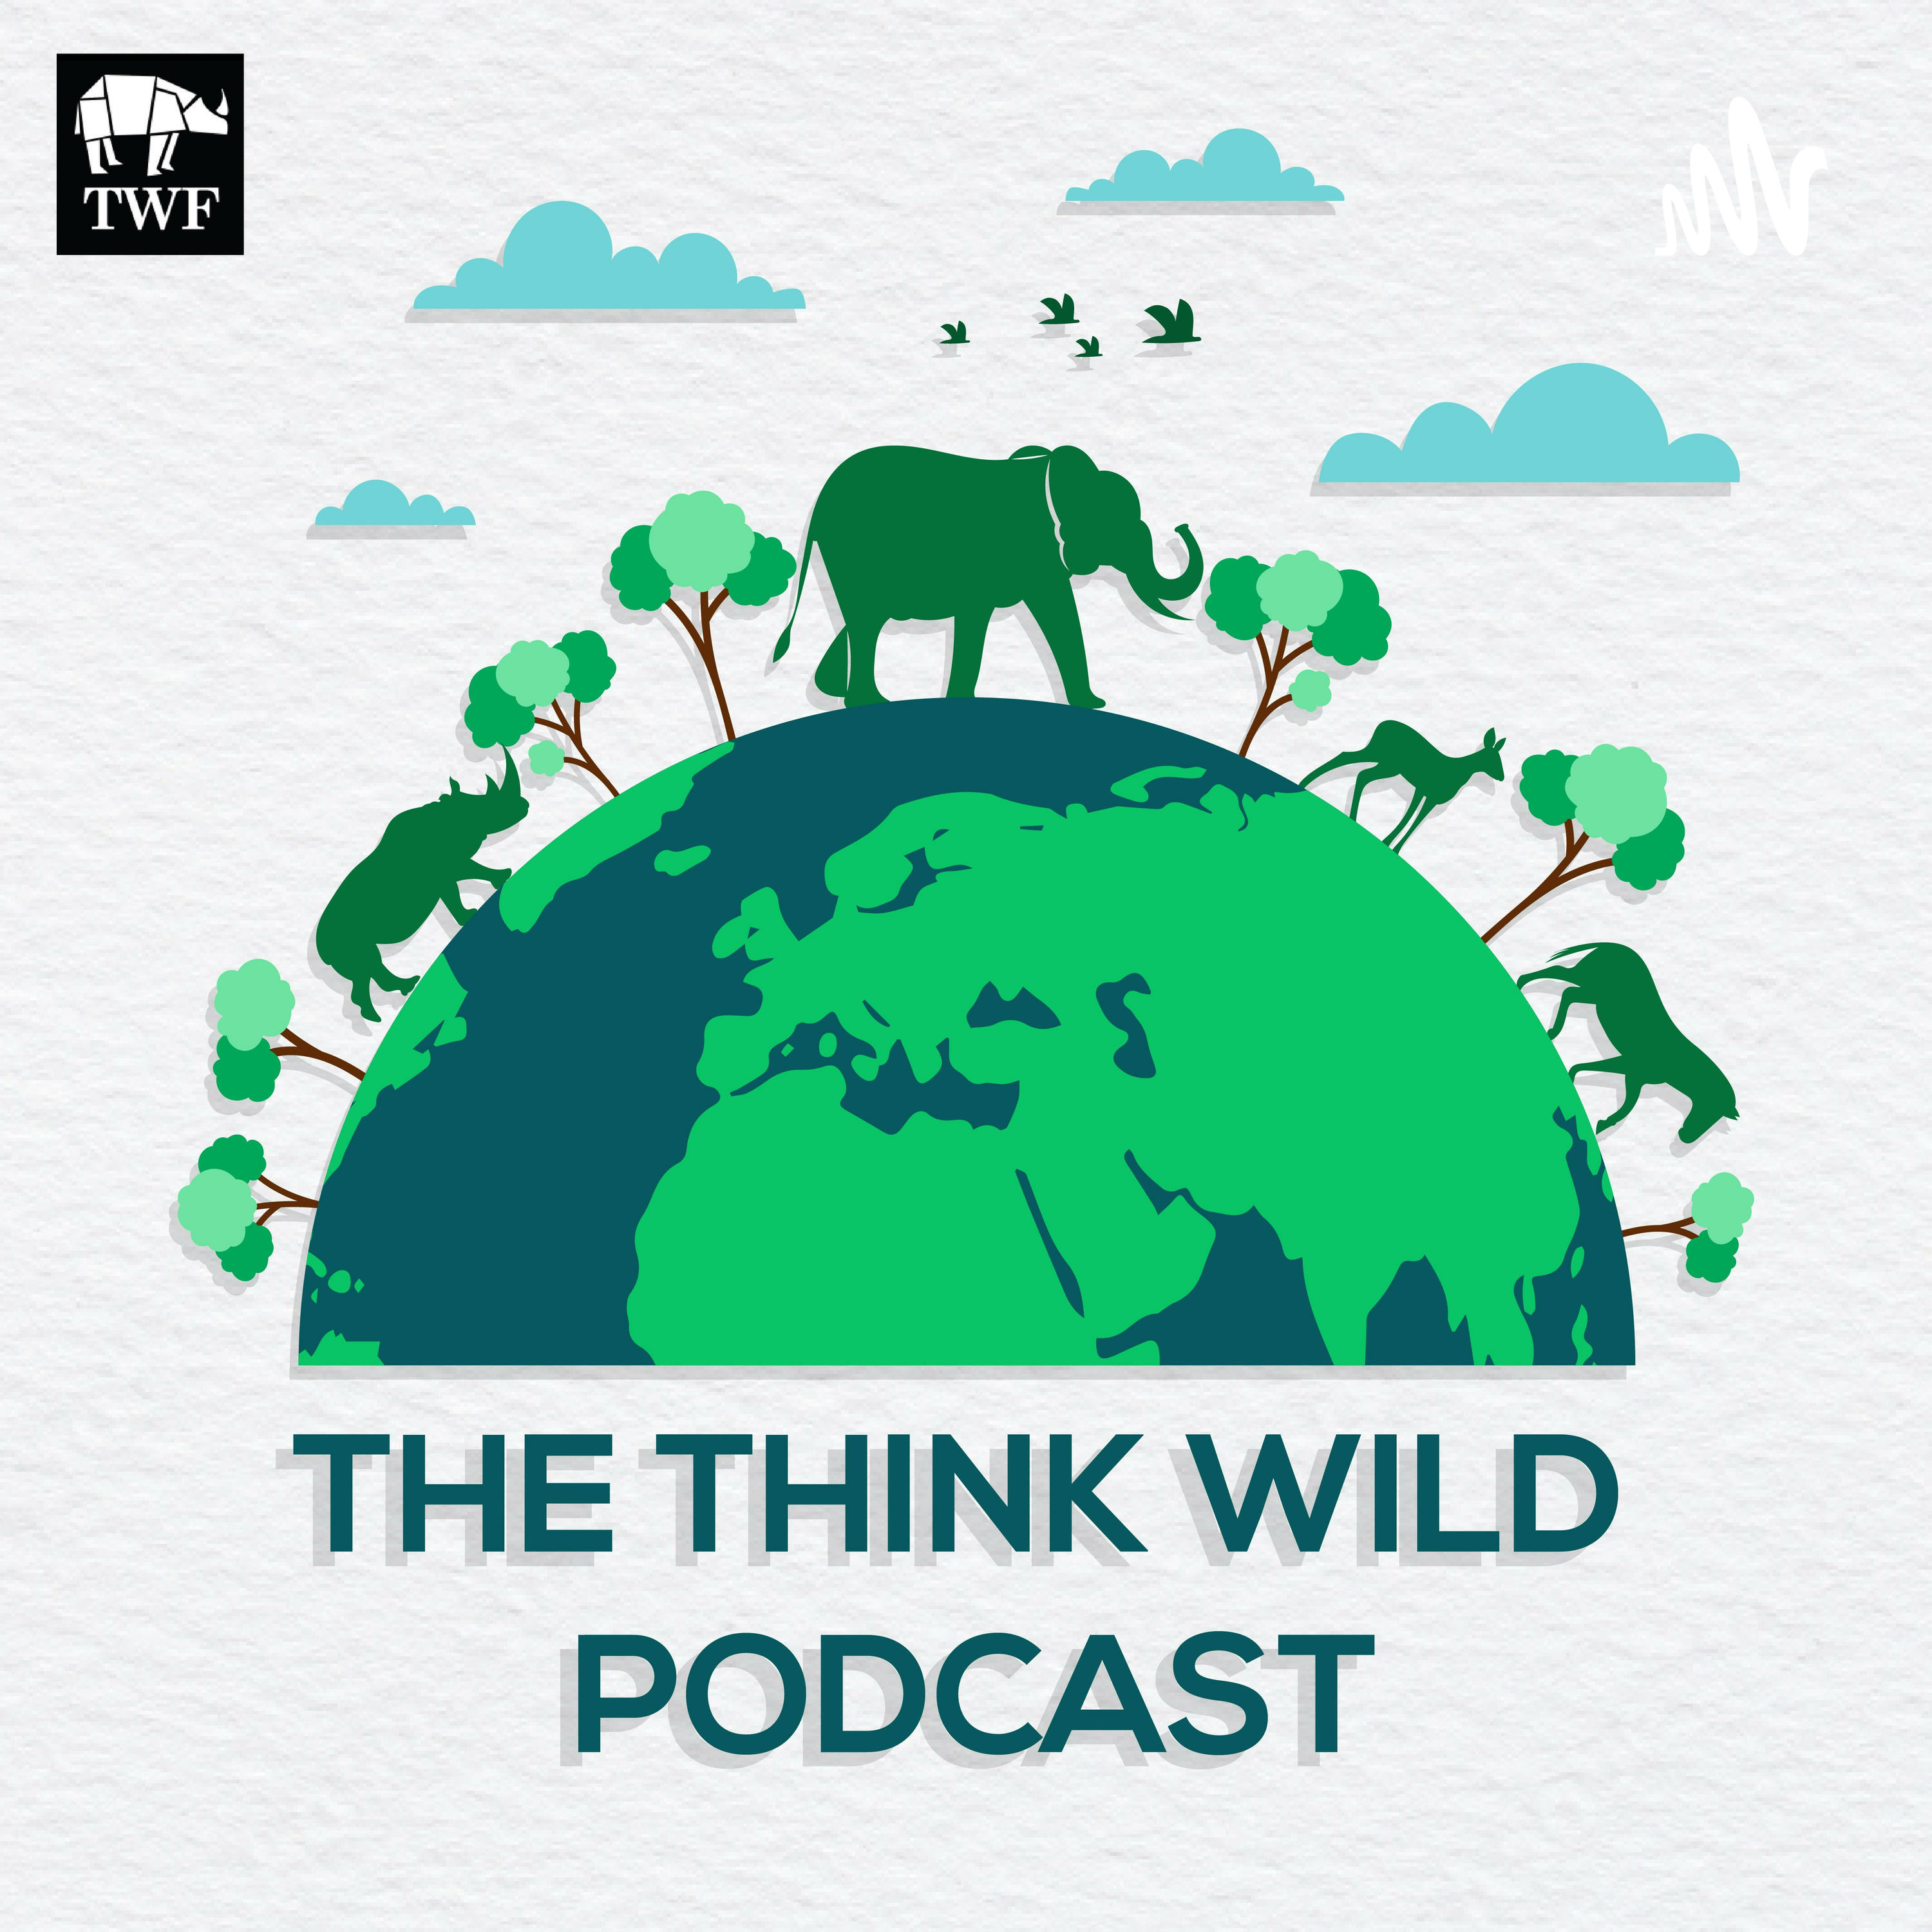 Episode 50: Tackling human-wildlife conflict in the Western Ghats with Dr. Sanjay Gubbi, Wildlife Biologist